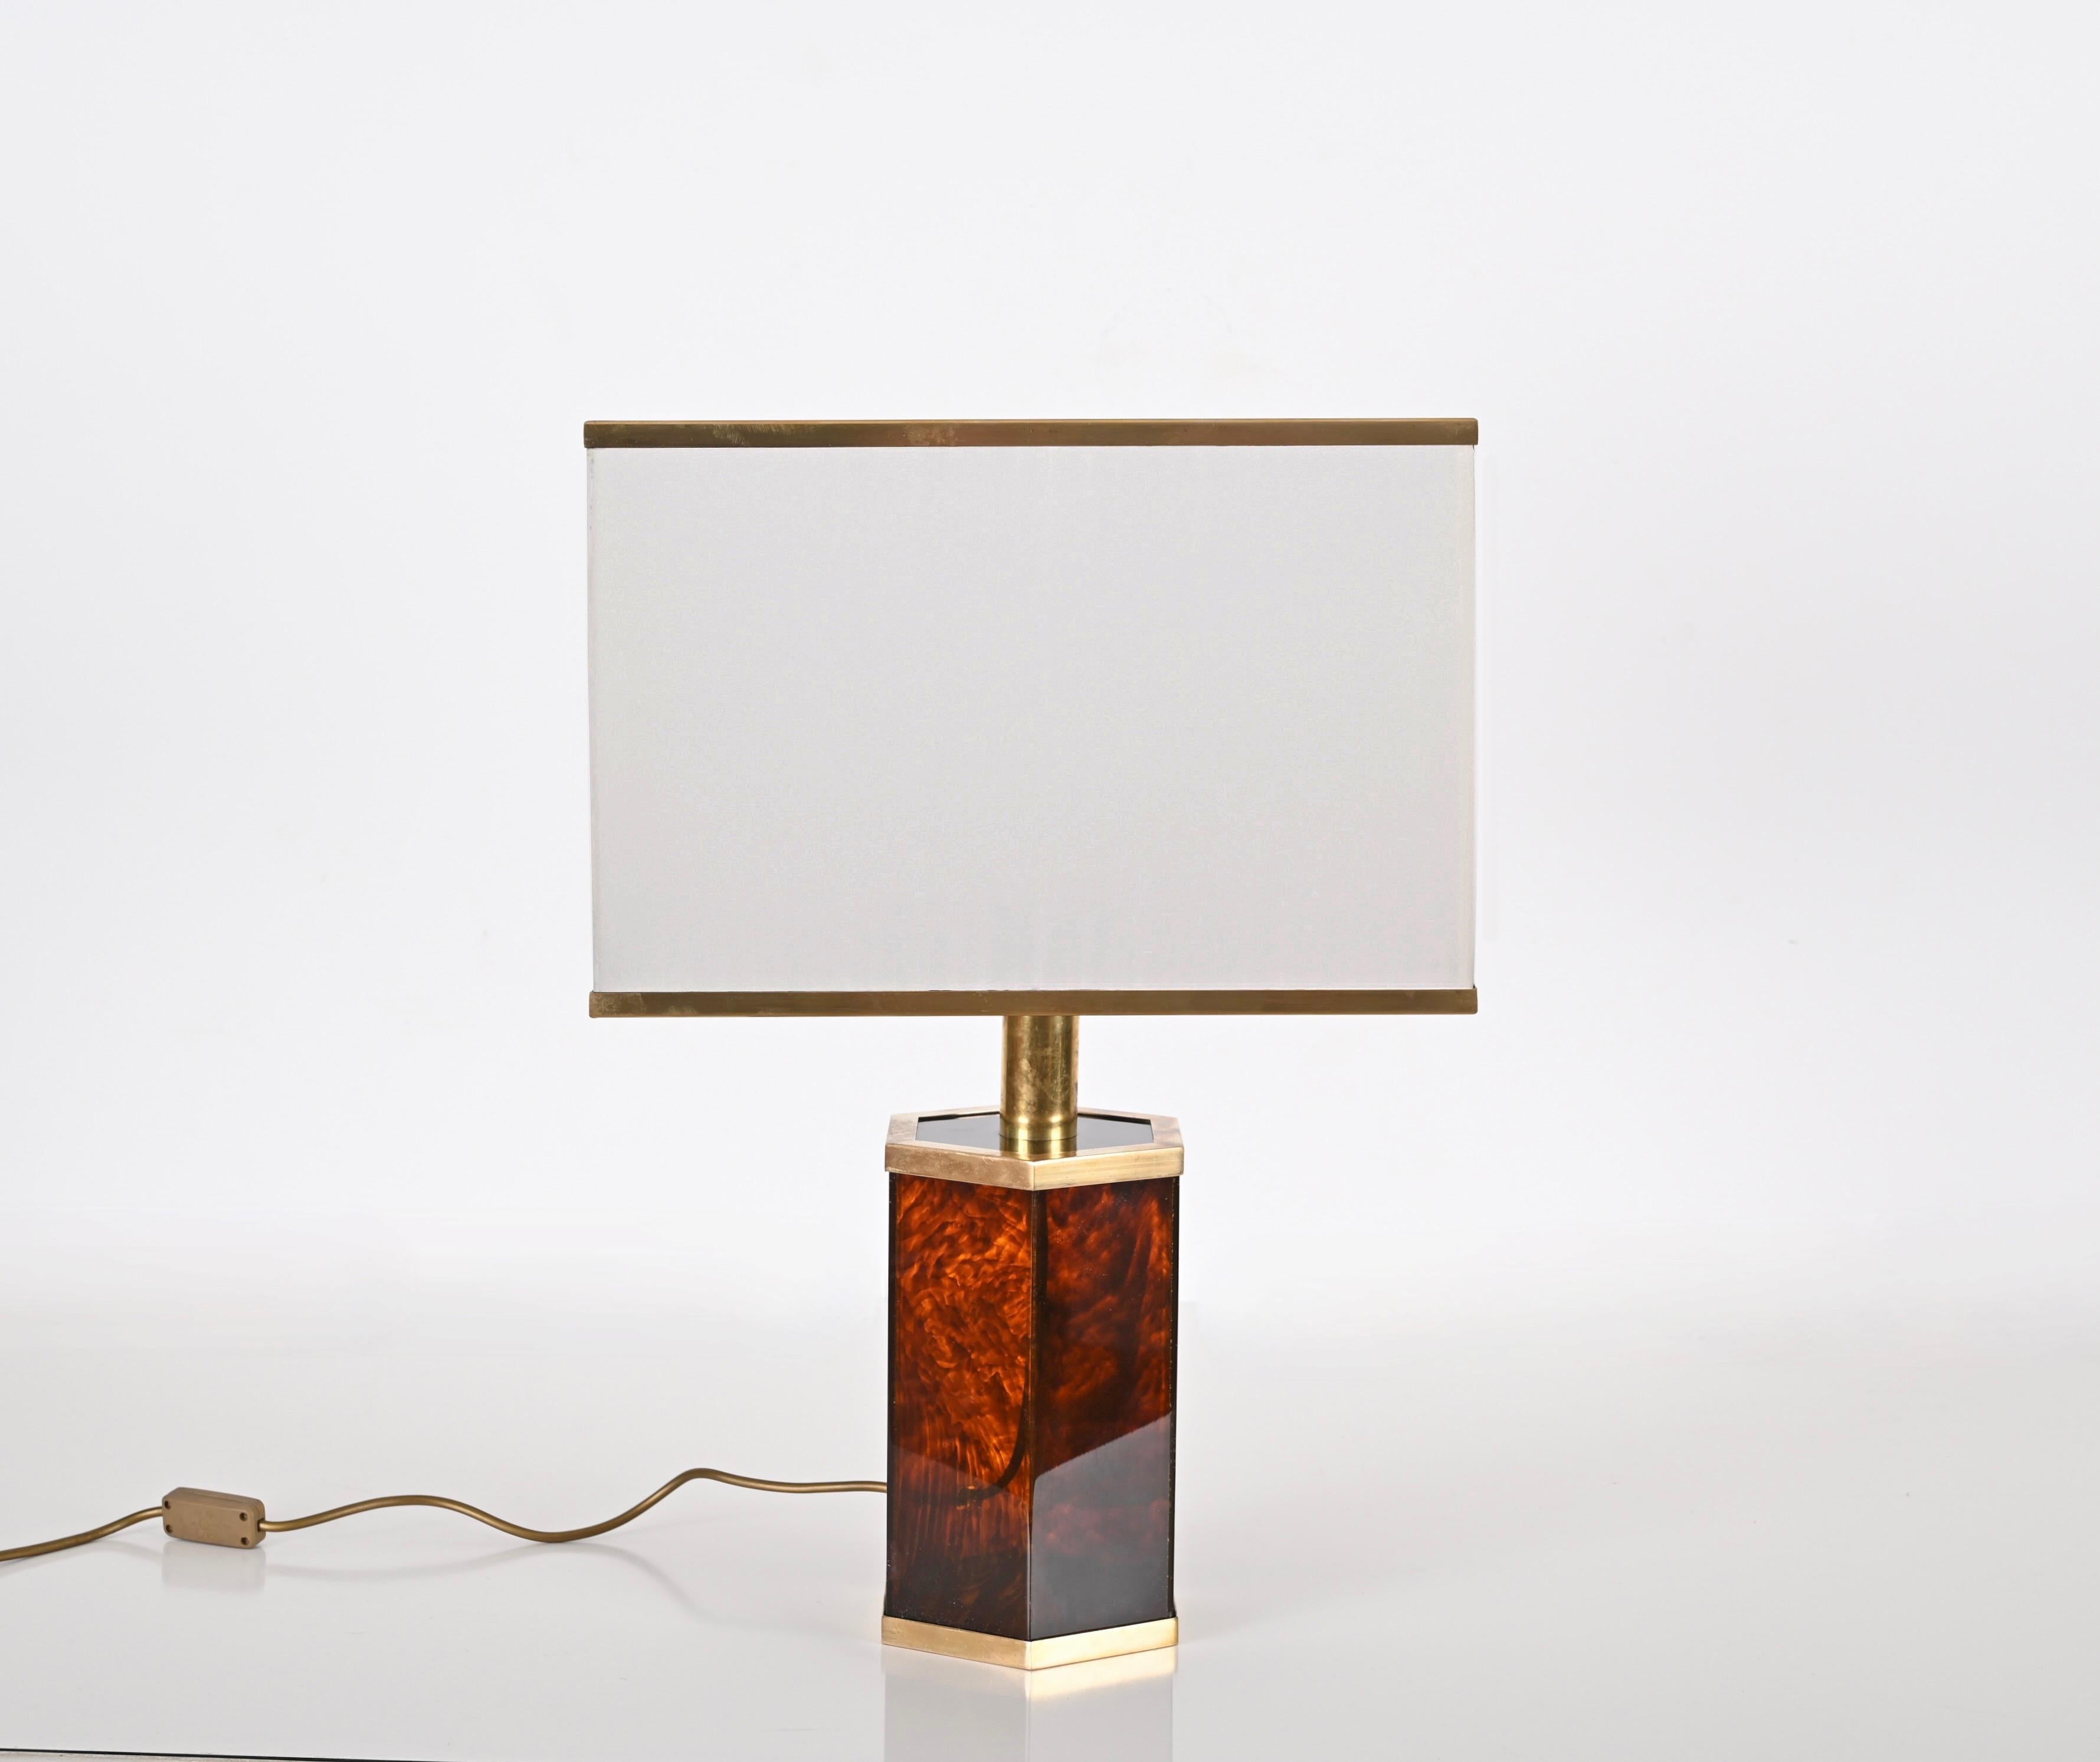 20th Century Willy Rizzo, Italian Table Lamp in Tortoiseshell Effect Lucite and Brass, 1970s For Sale